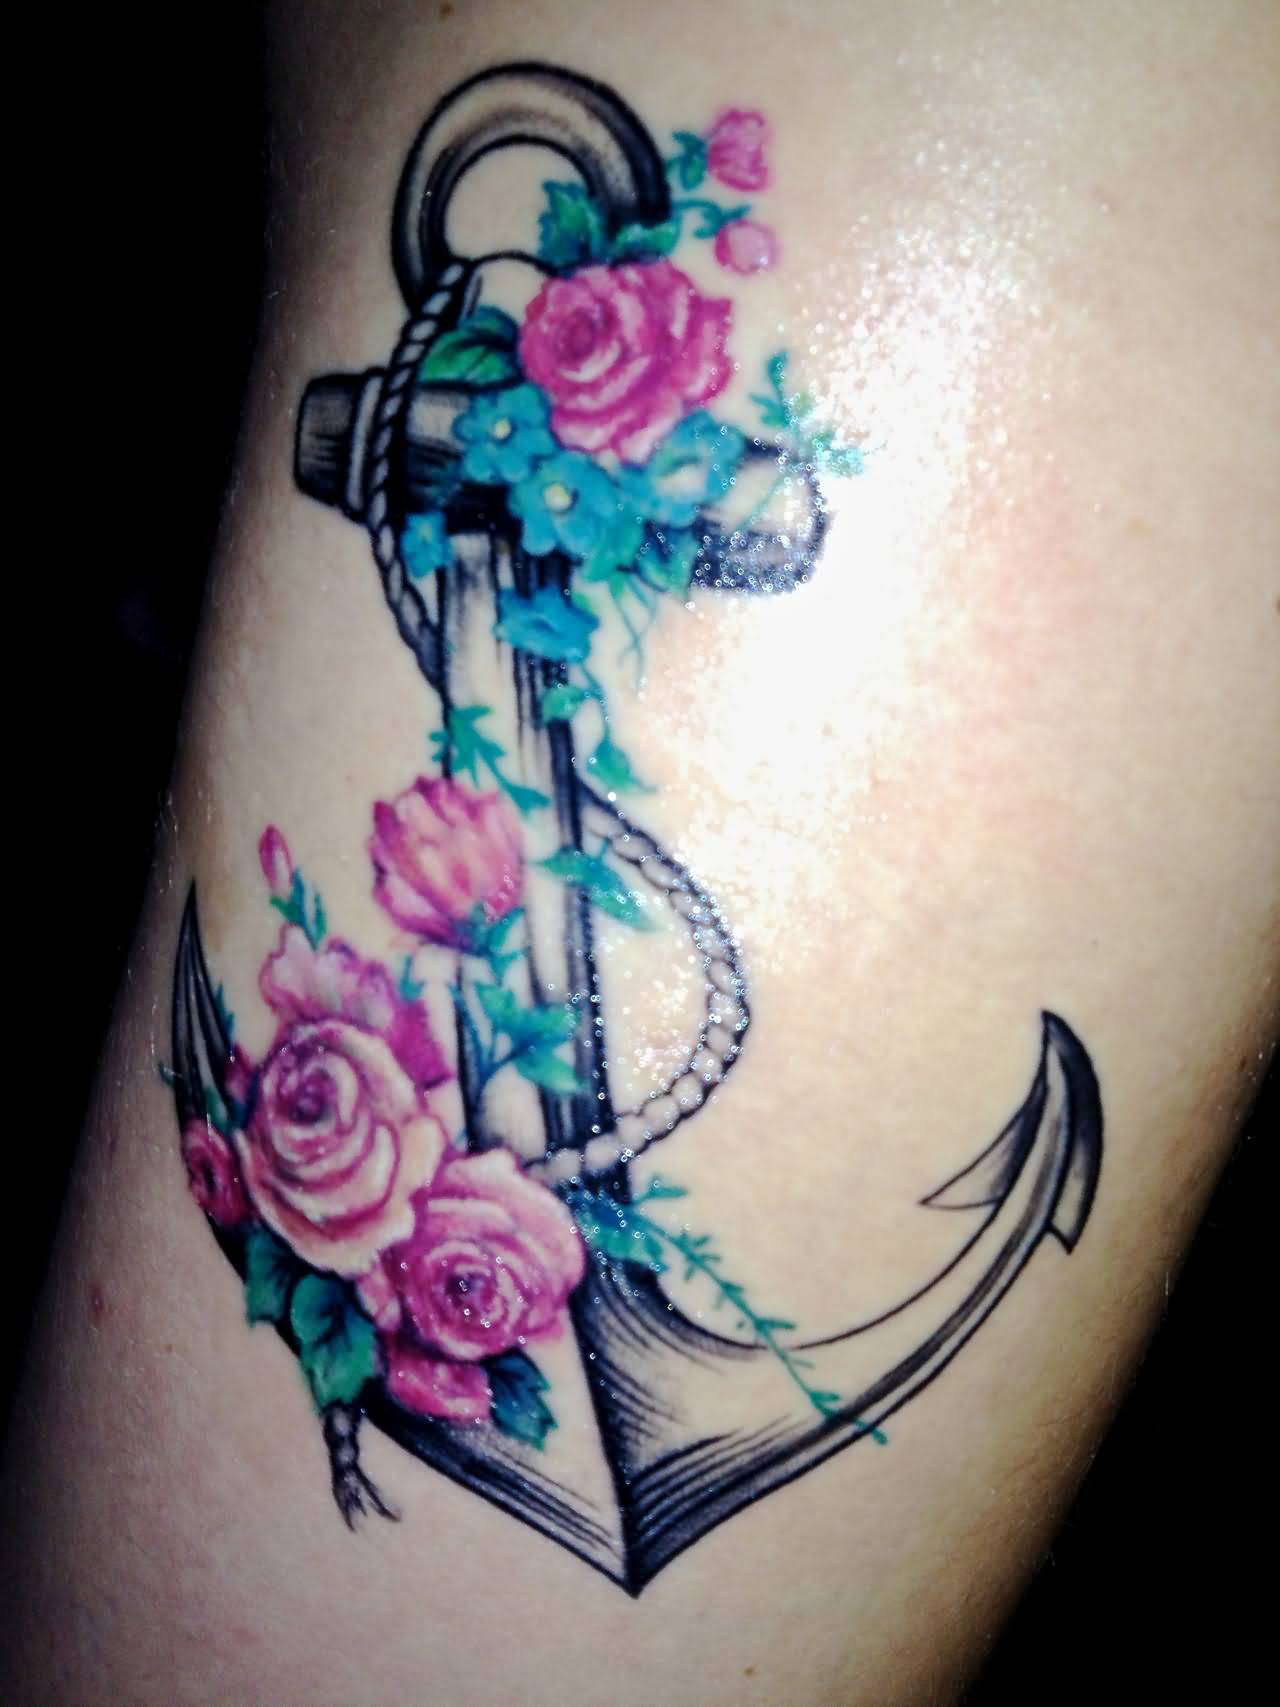 Cute Colorful Anchor With Flowers Tattoo Design For Sleeve